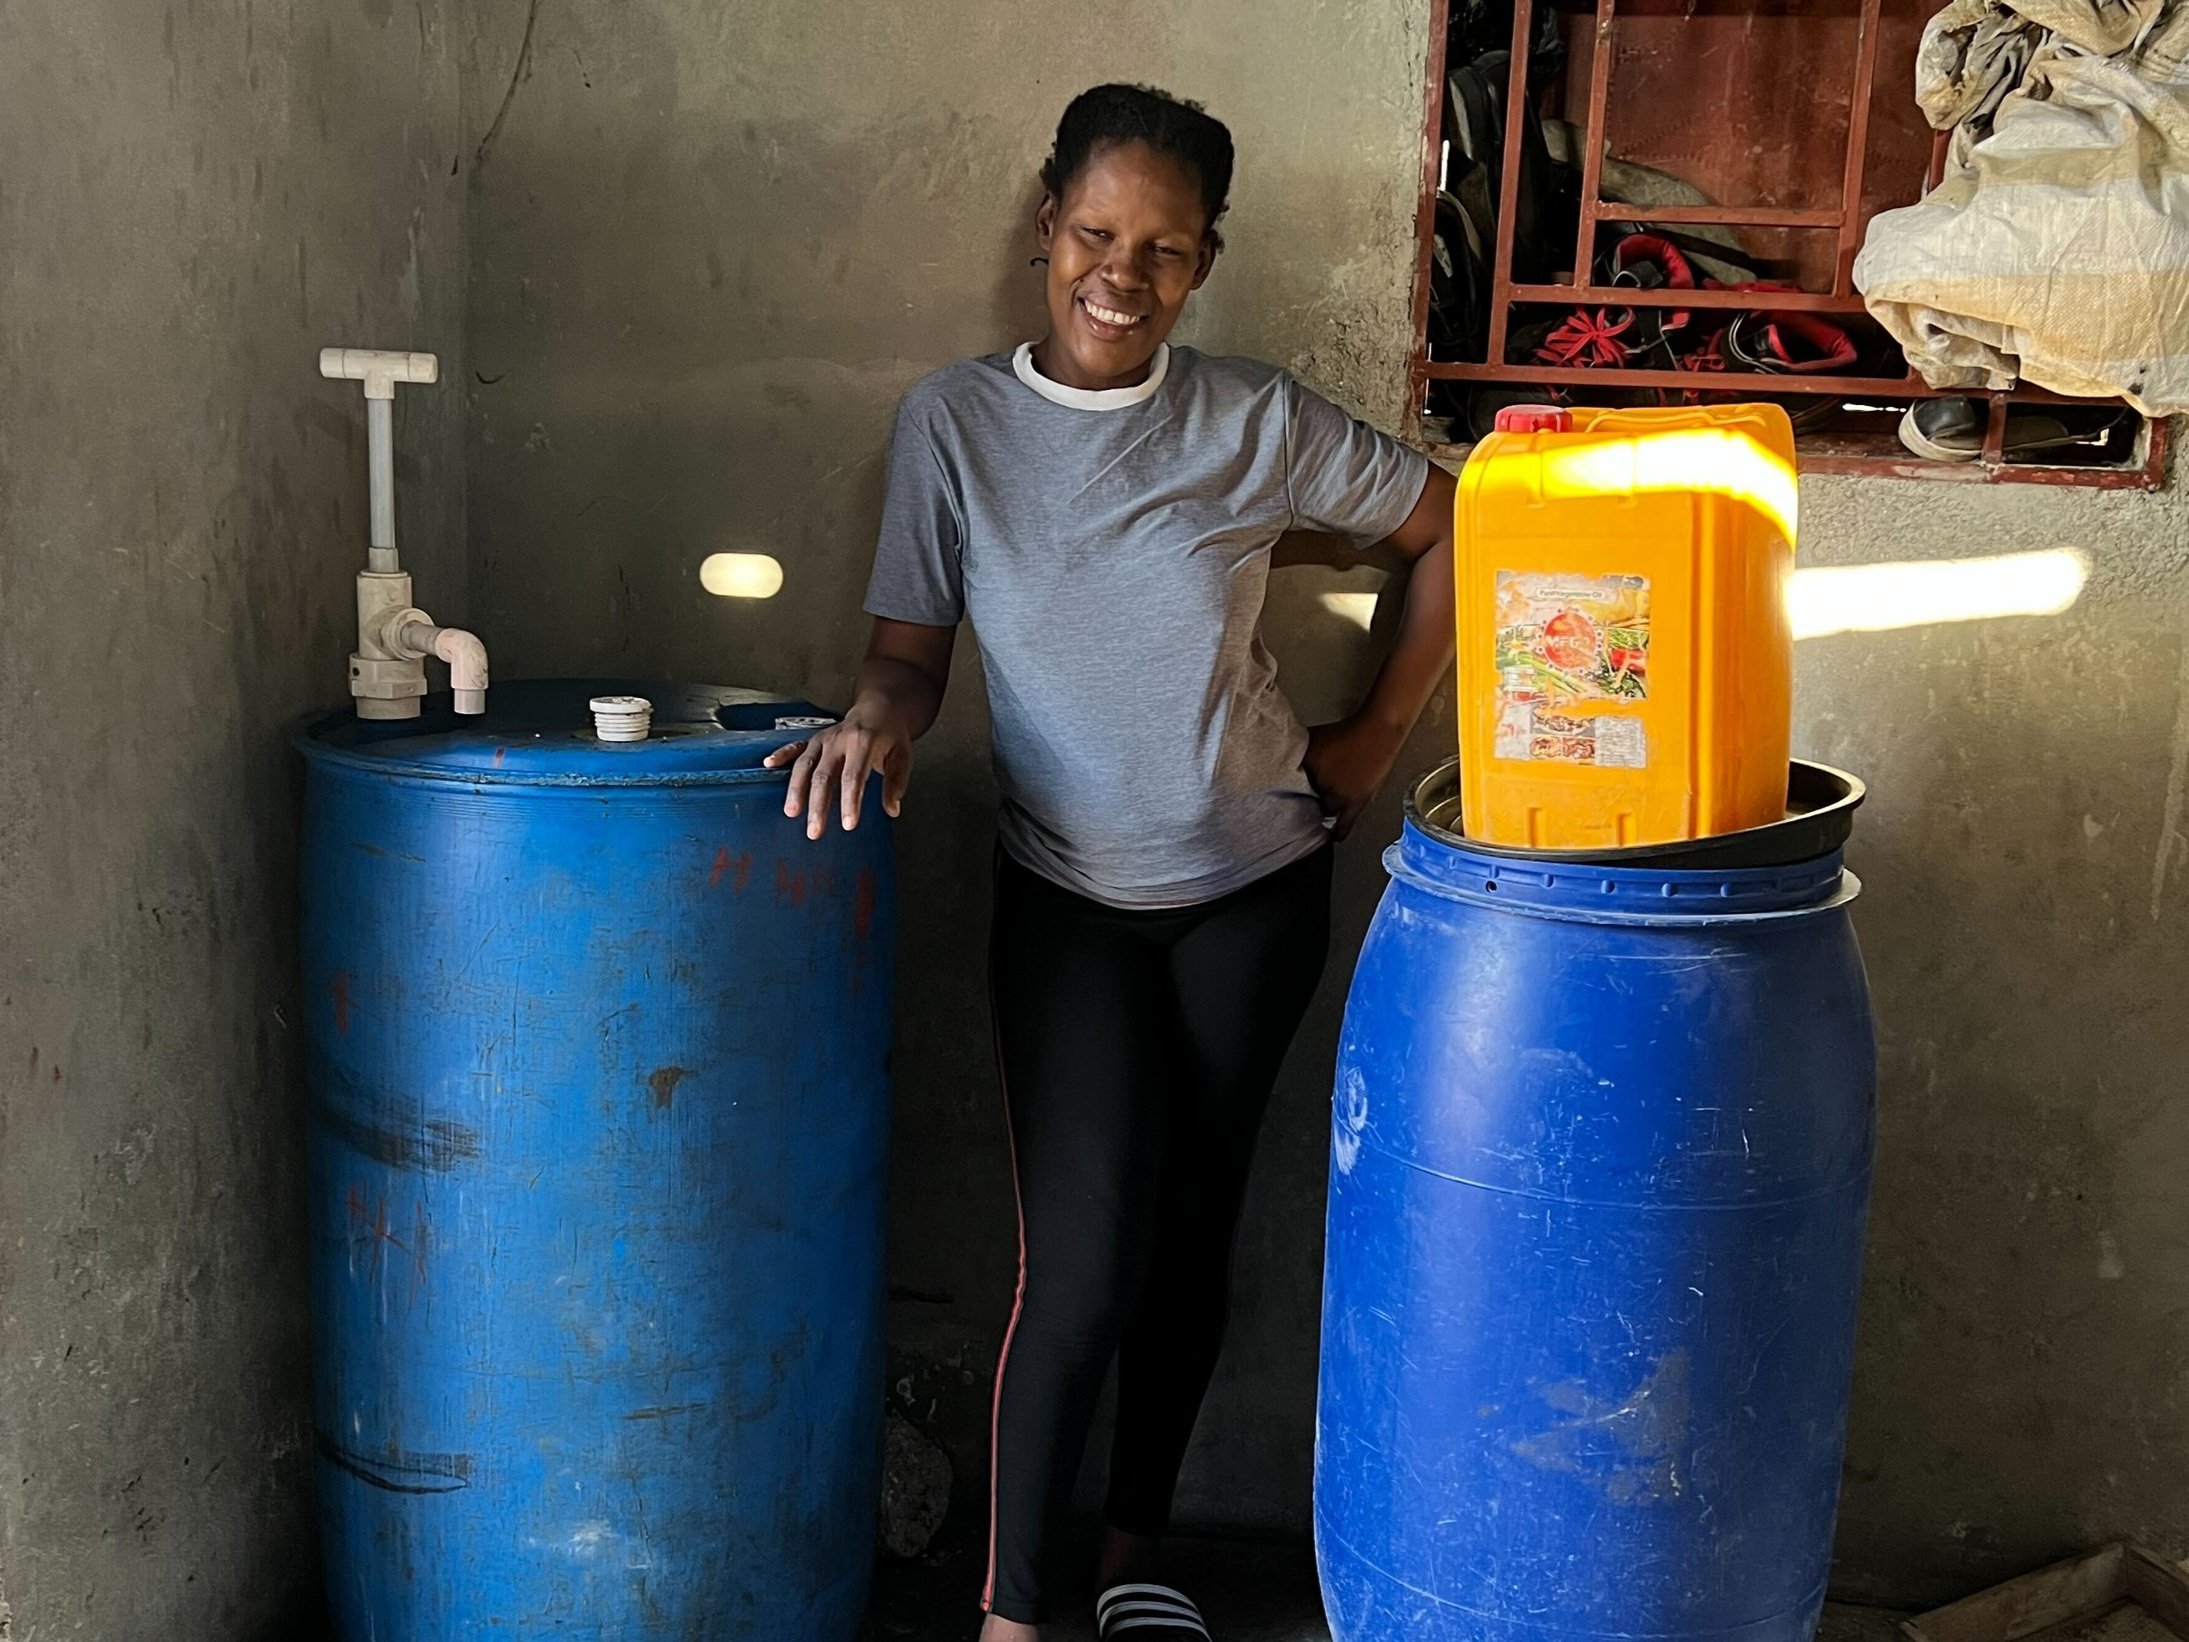  Another WORK family who’s been inspired by our entrepreneurs is Gertha. Upon learning about our Small Business Program and the success of our participants, Gertha saved up a small amount of money to start her business selling oil to the community. T